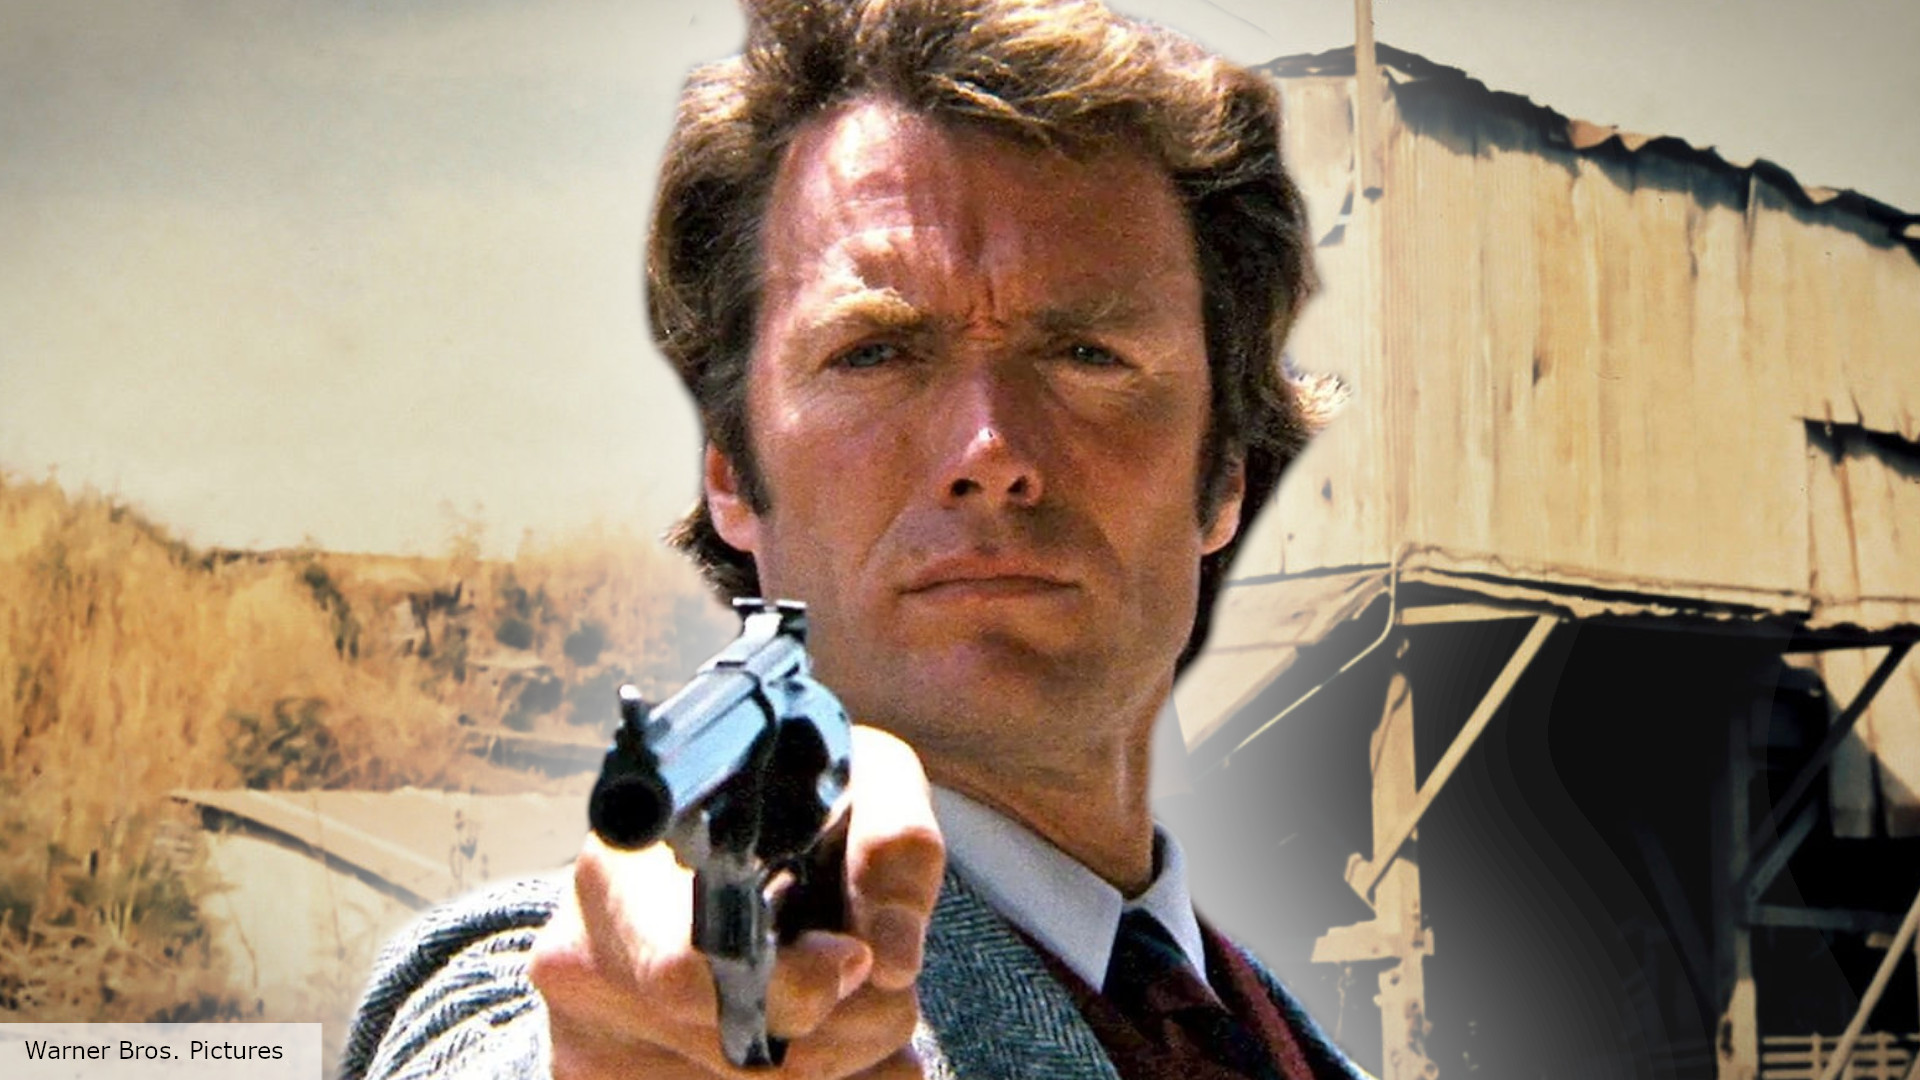 Clint Eastwood wanted to return as Dirty Harry in very surprising way